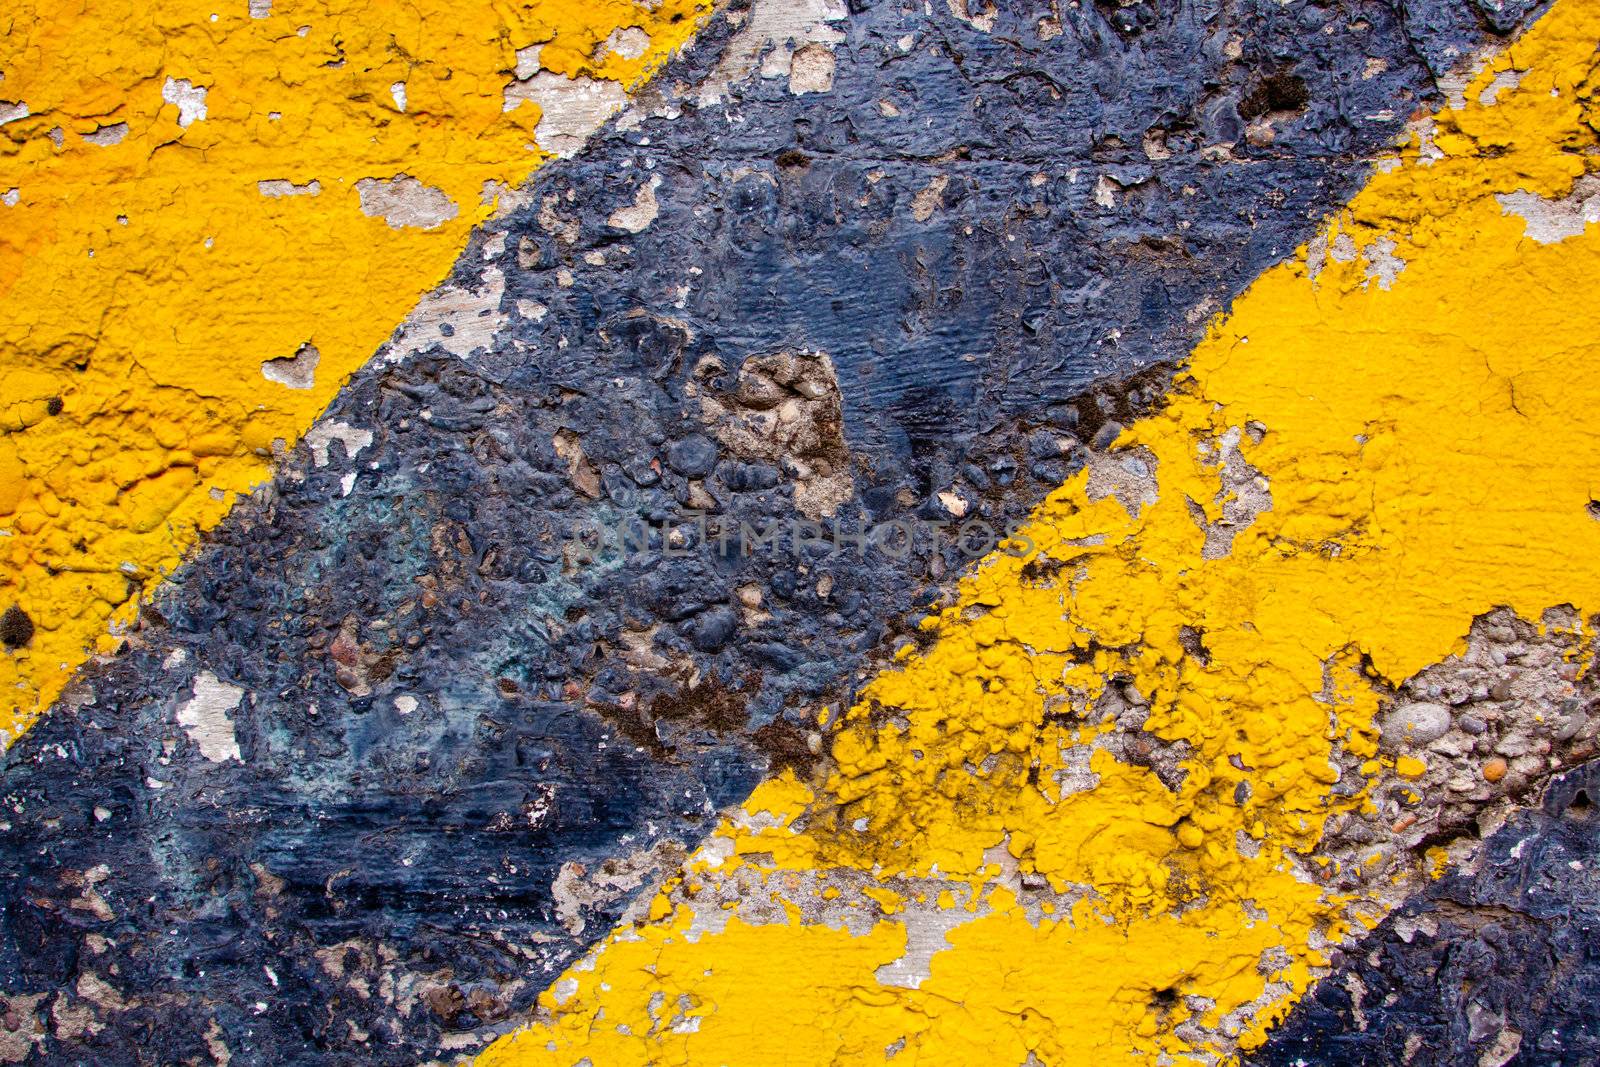 A black and yellow old wall is striped for warning or caution to create an abstract texture of a rubble decaying building wall.